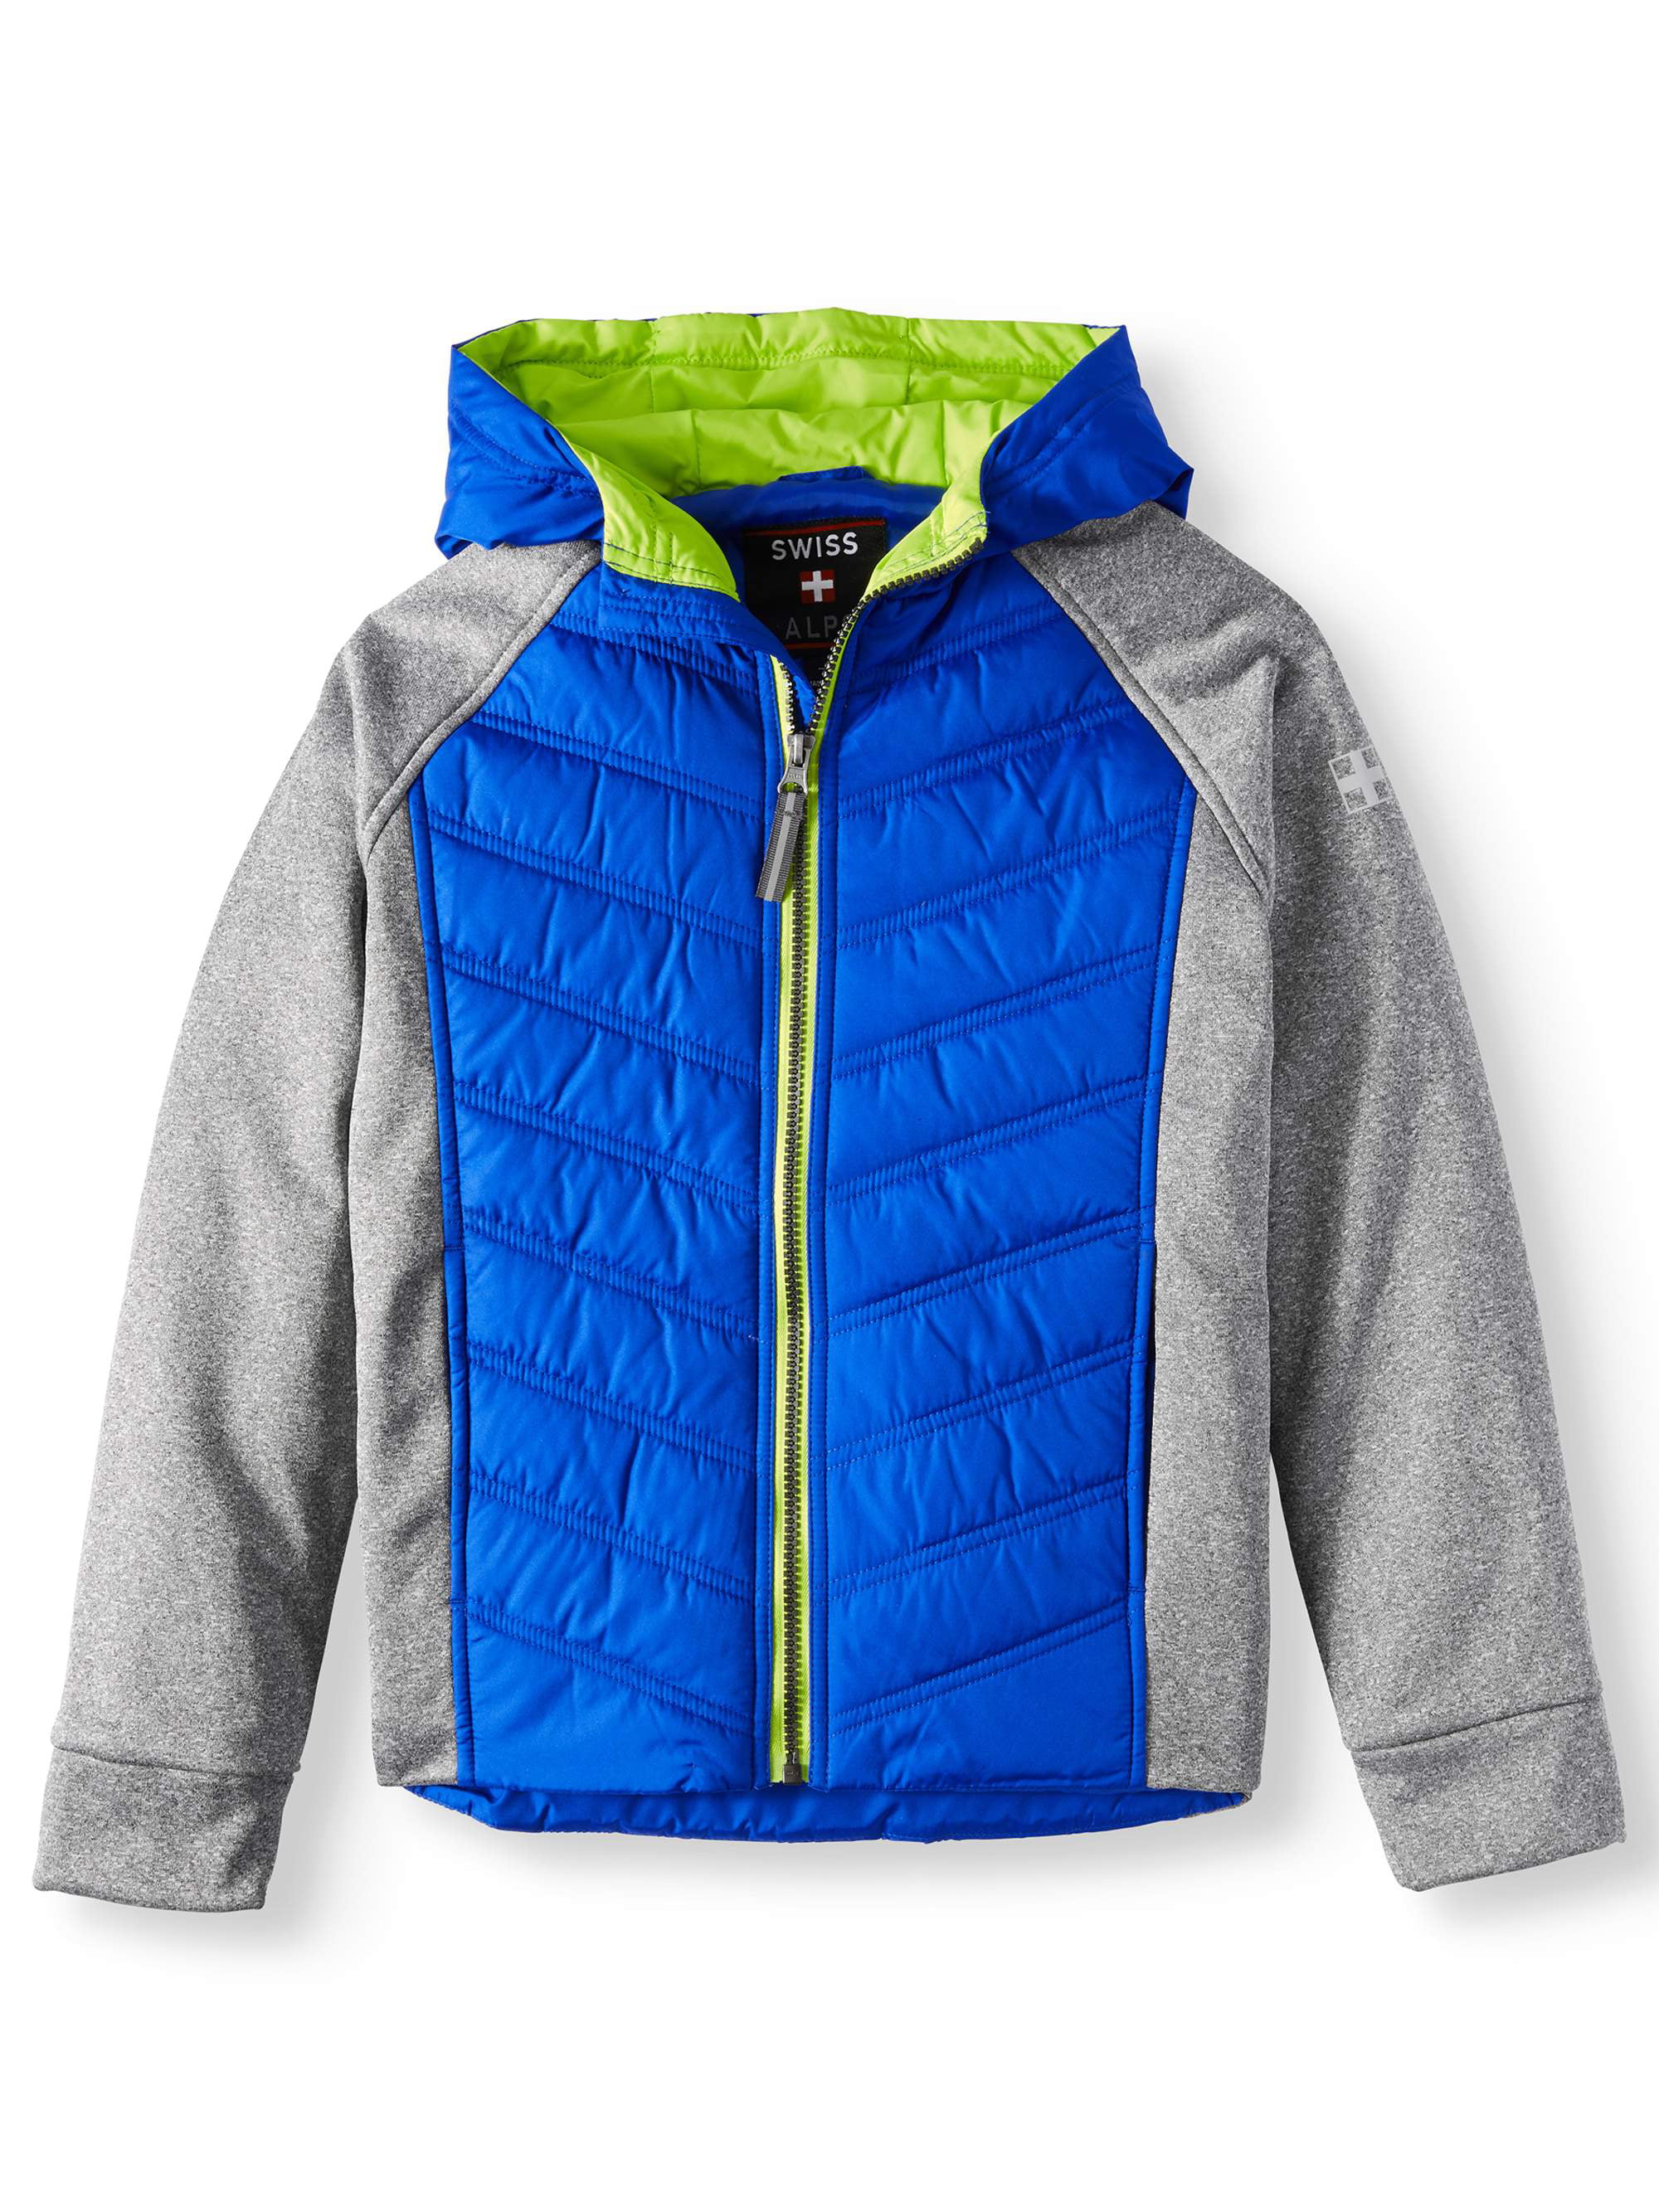 Swiss Alps - Mixed Media Jacket with Puffer Body and Fleece Sleeves ...